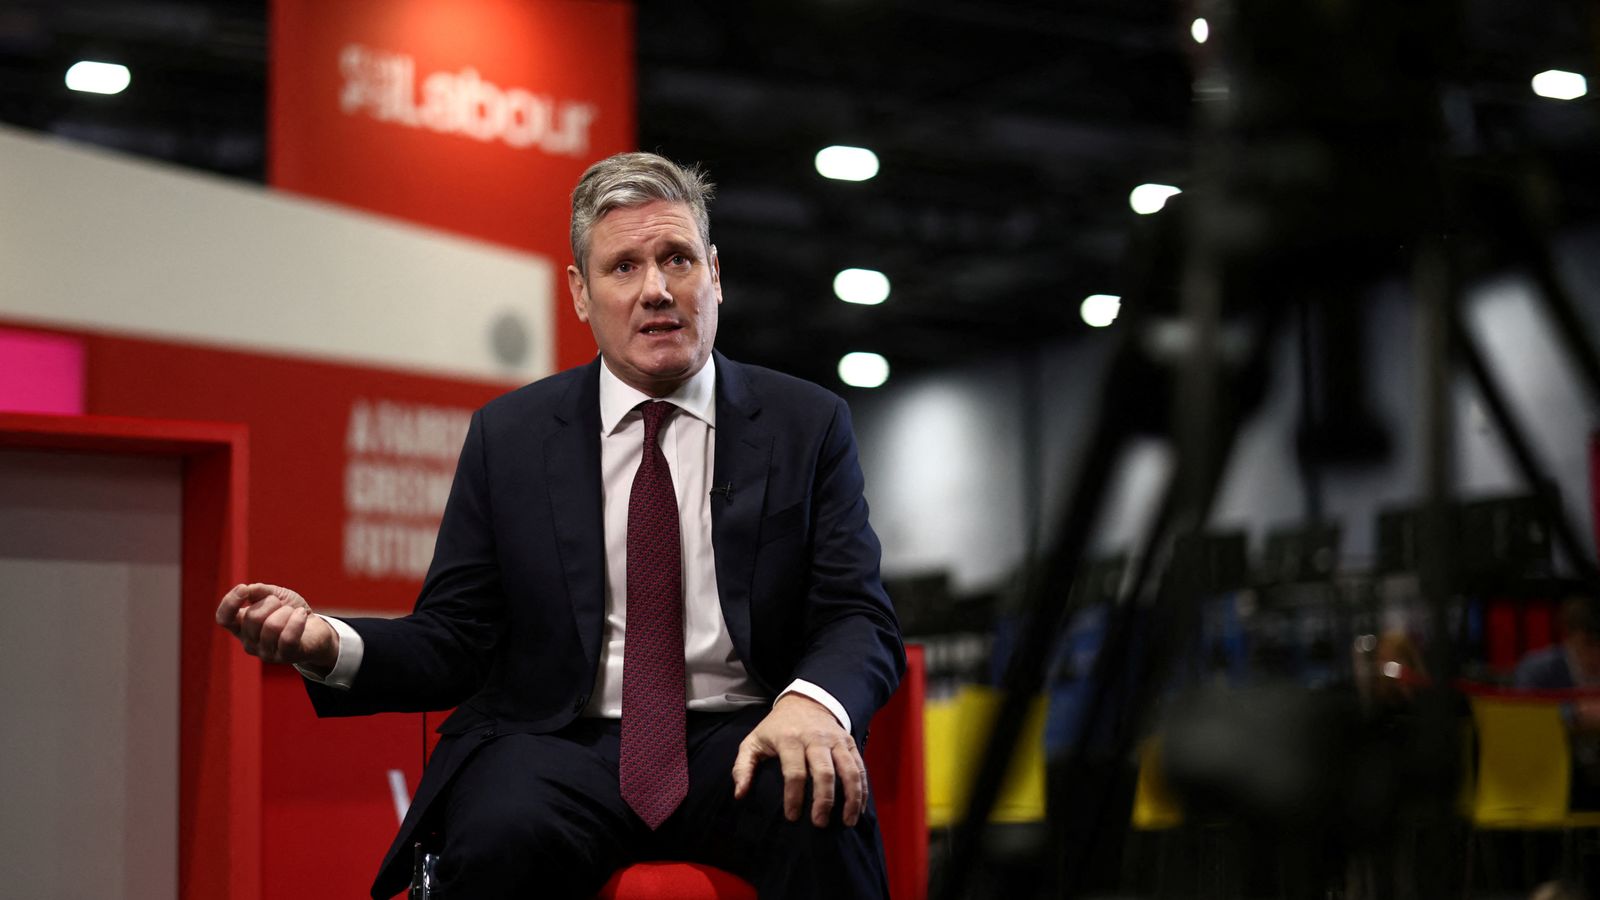 Keir Starmer's chief of staff to leave role as Labour leader moves party to an 'election footing'